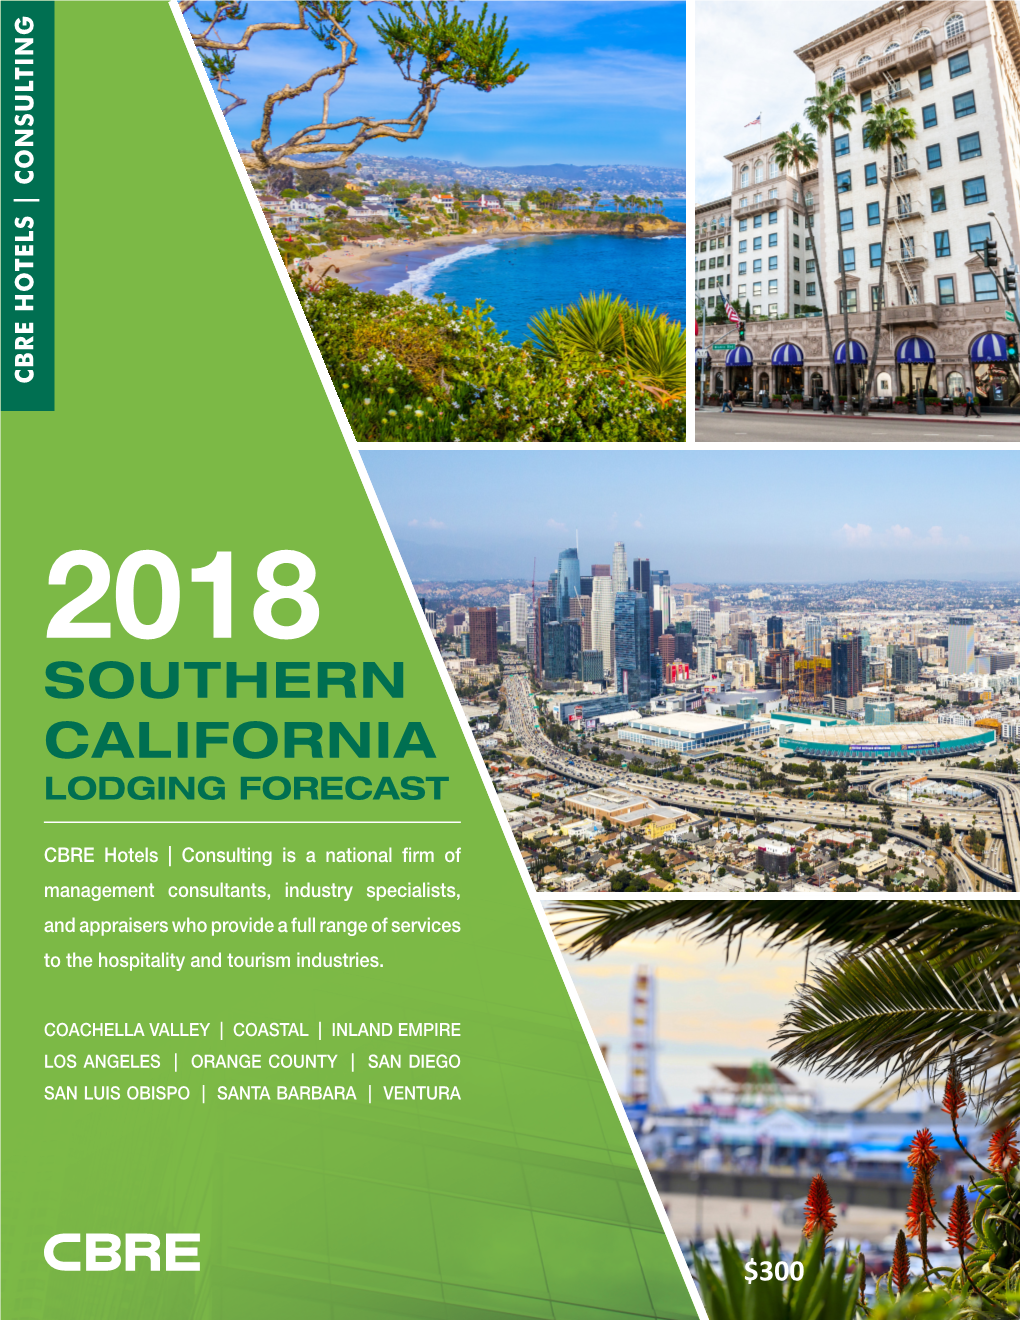 Southern California Lodging Forecast